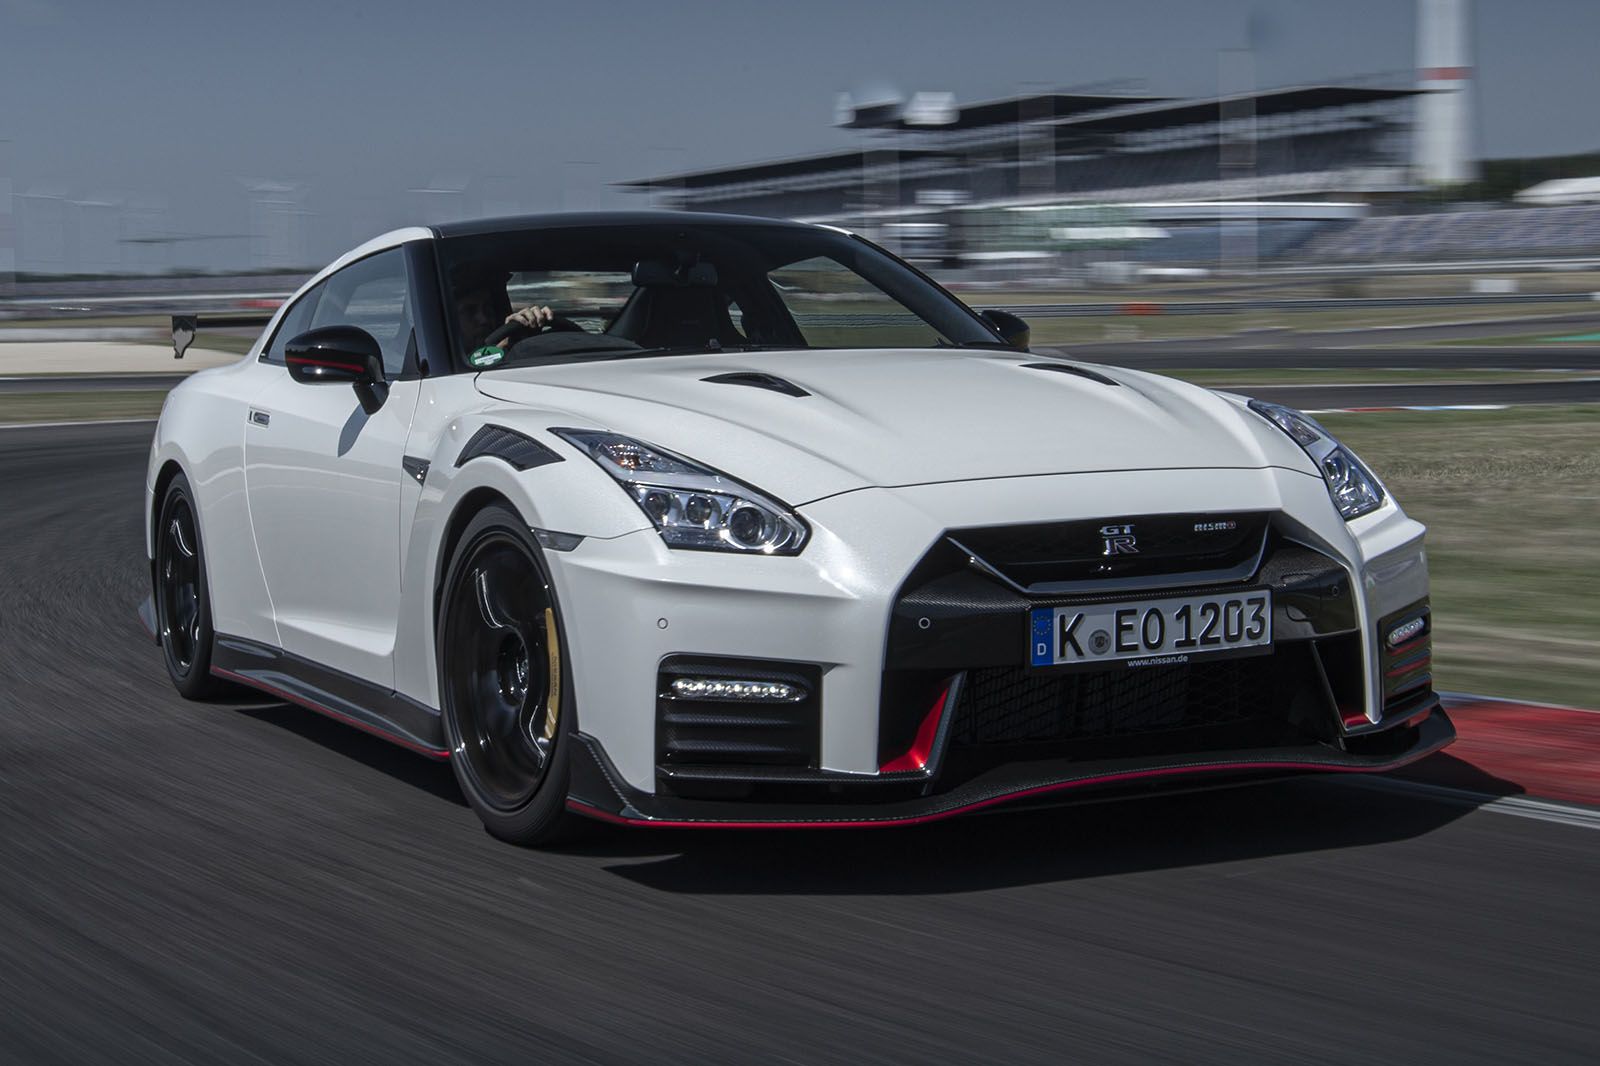 Pearl White Tricoat Nissan GT-R Nismo speeding on the track